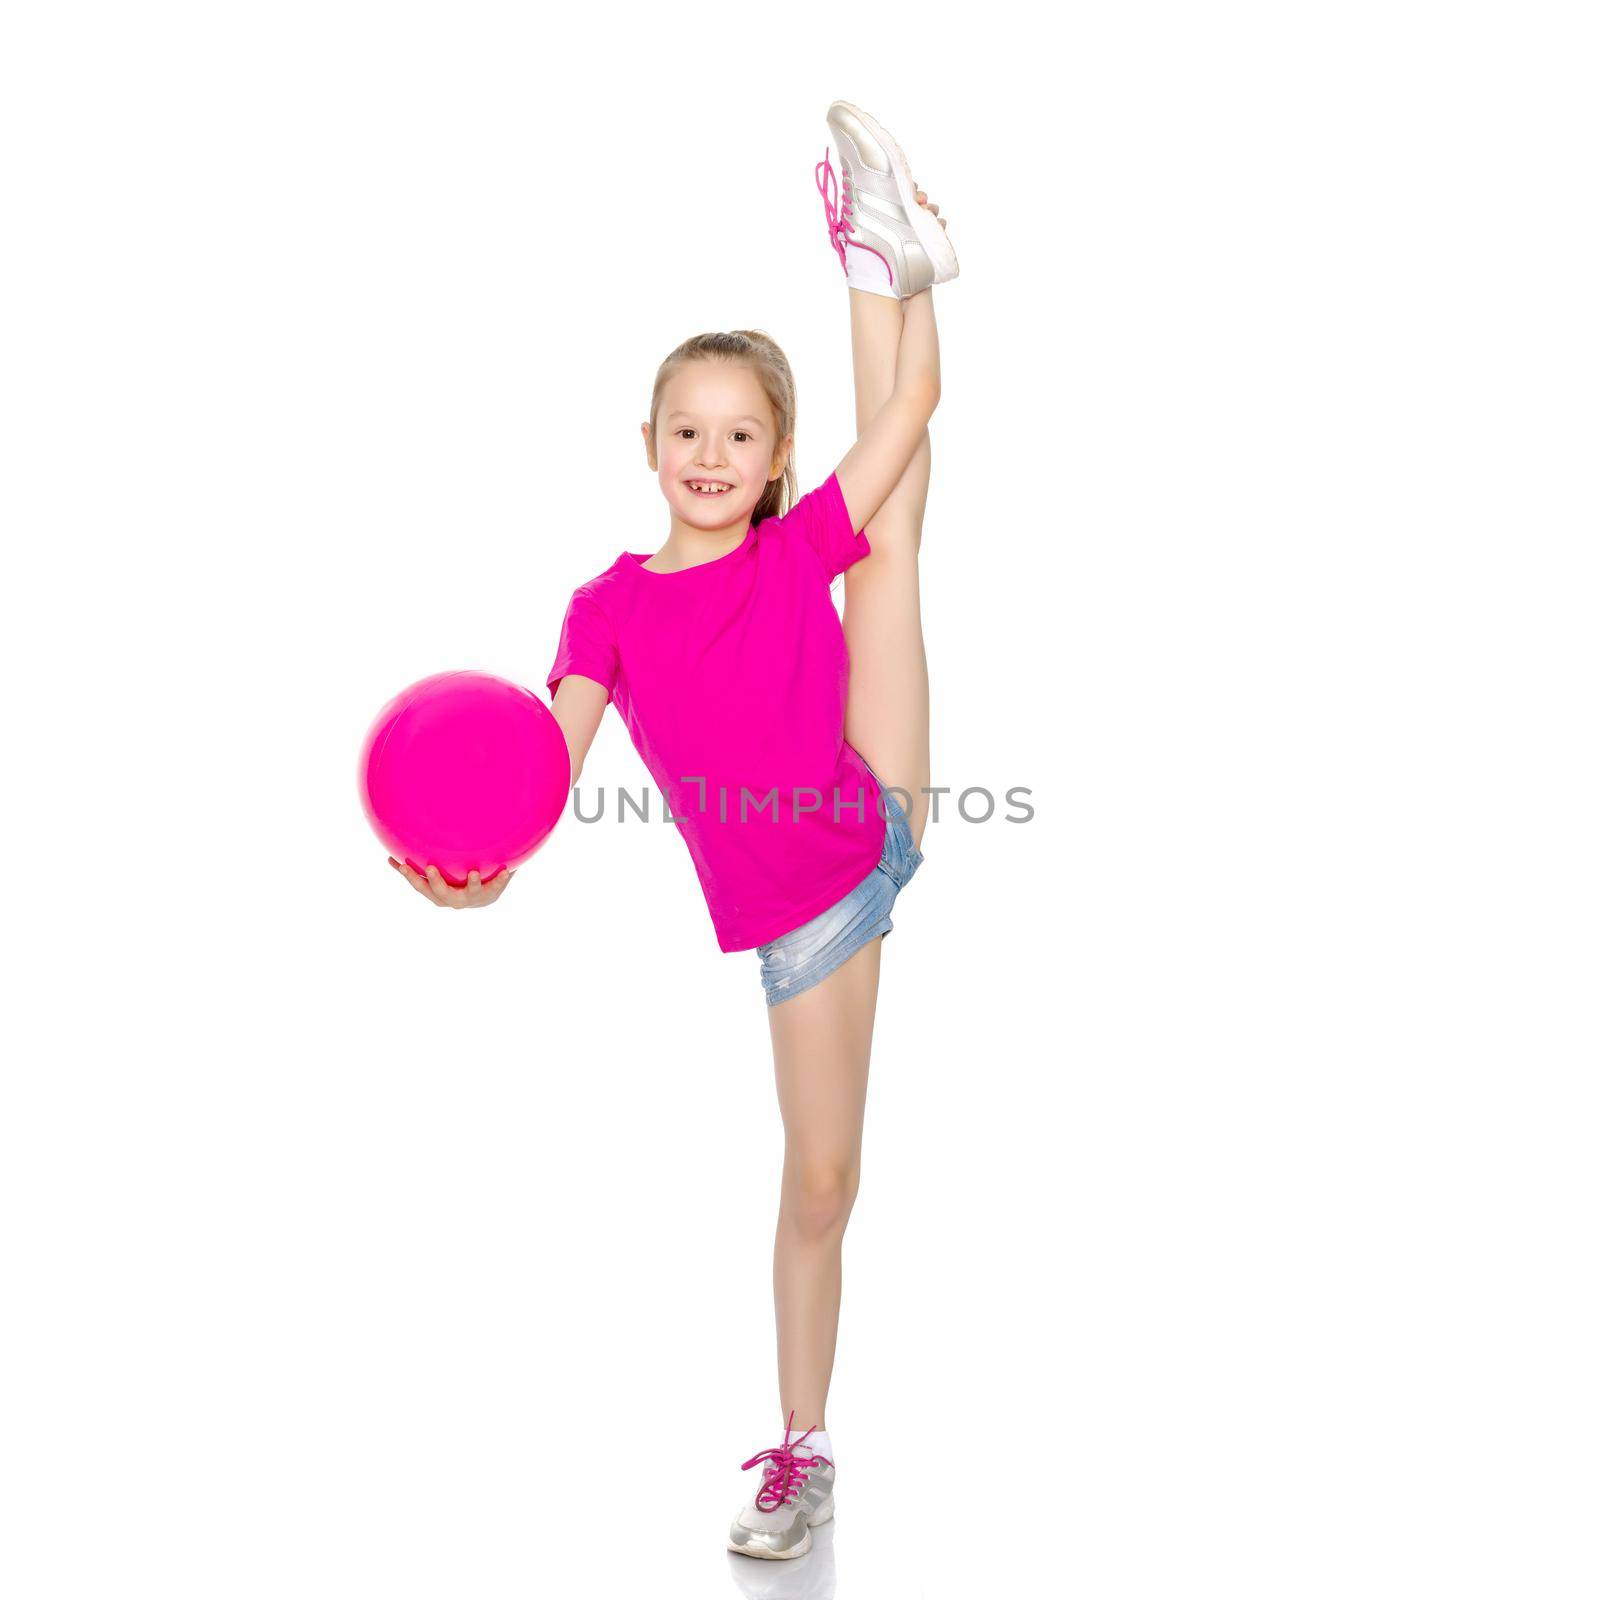 A charming little girl is engaged in fitness with a ball. The concept of gymnastics, health and sports. Isolated on white background.